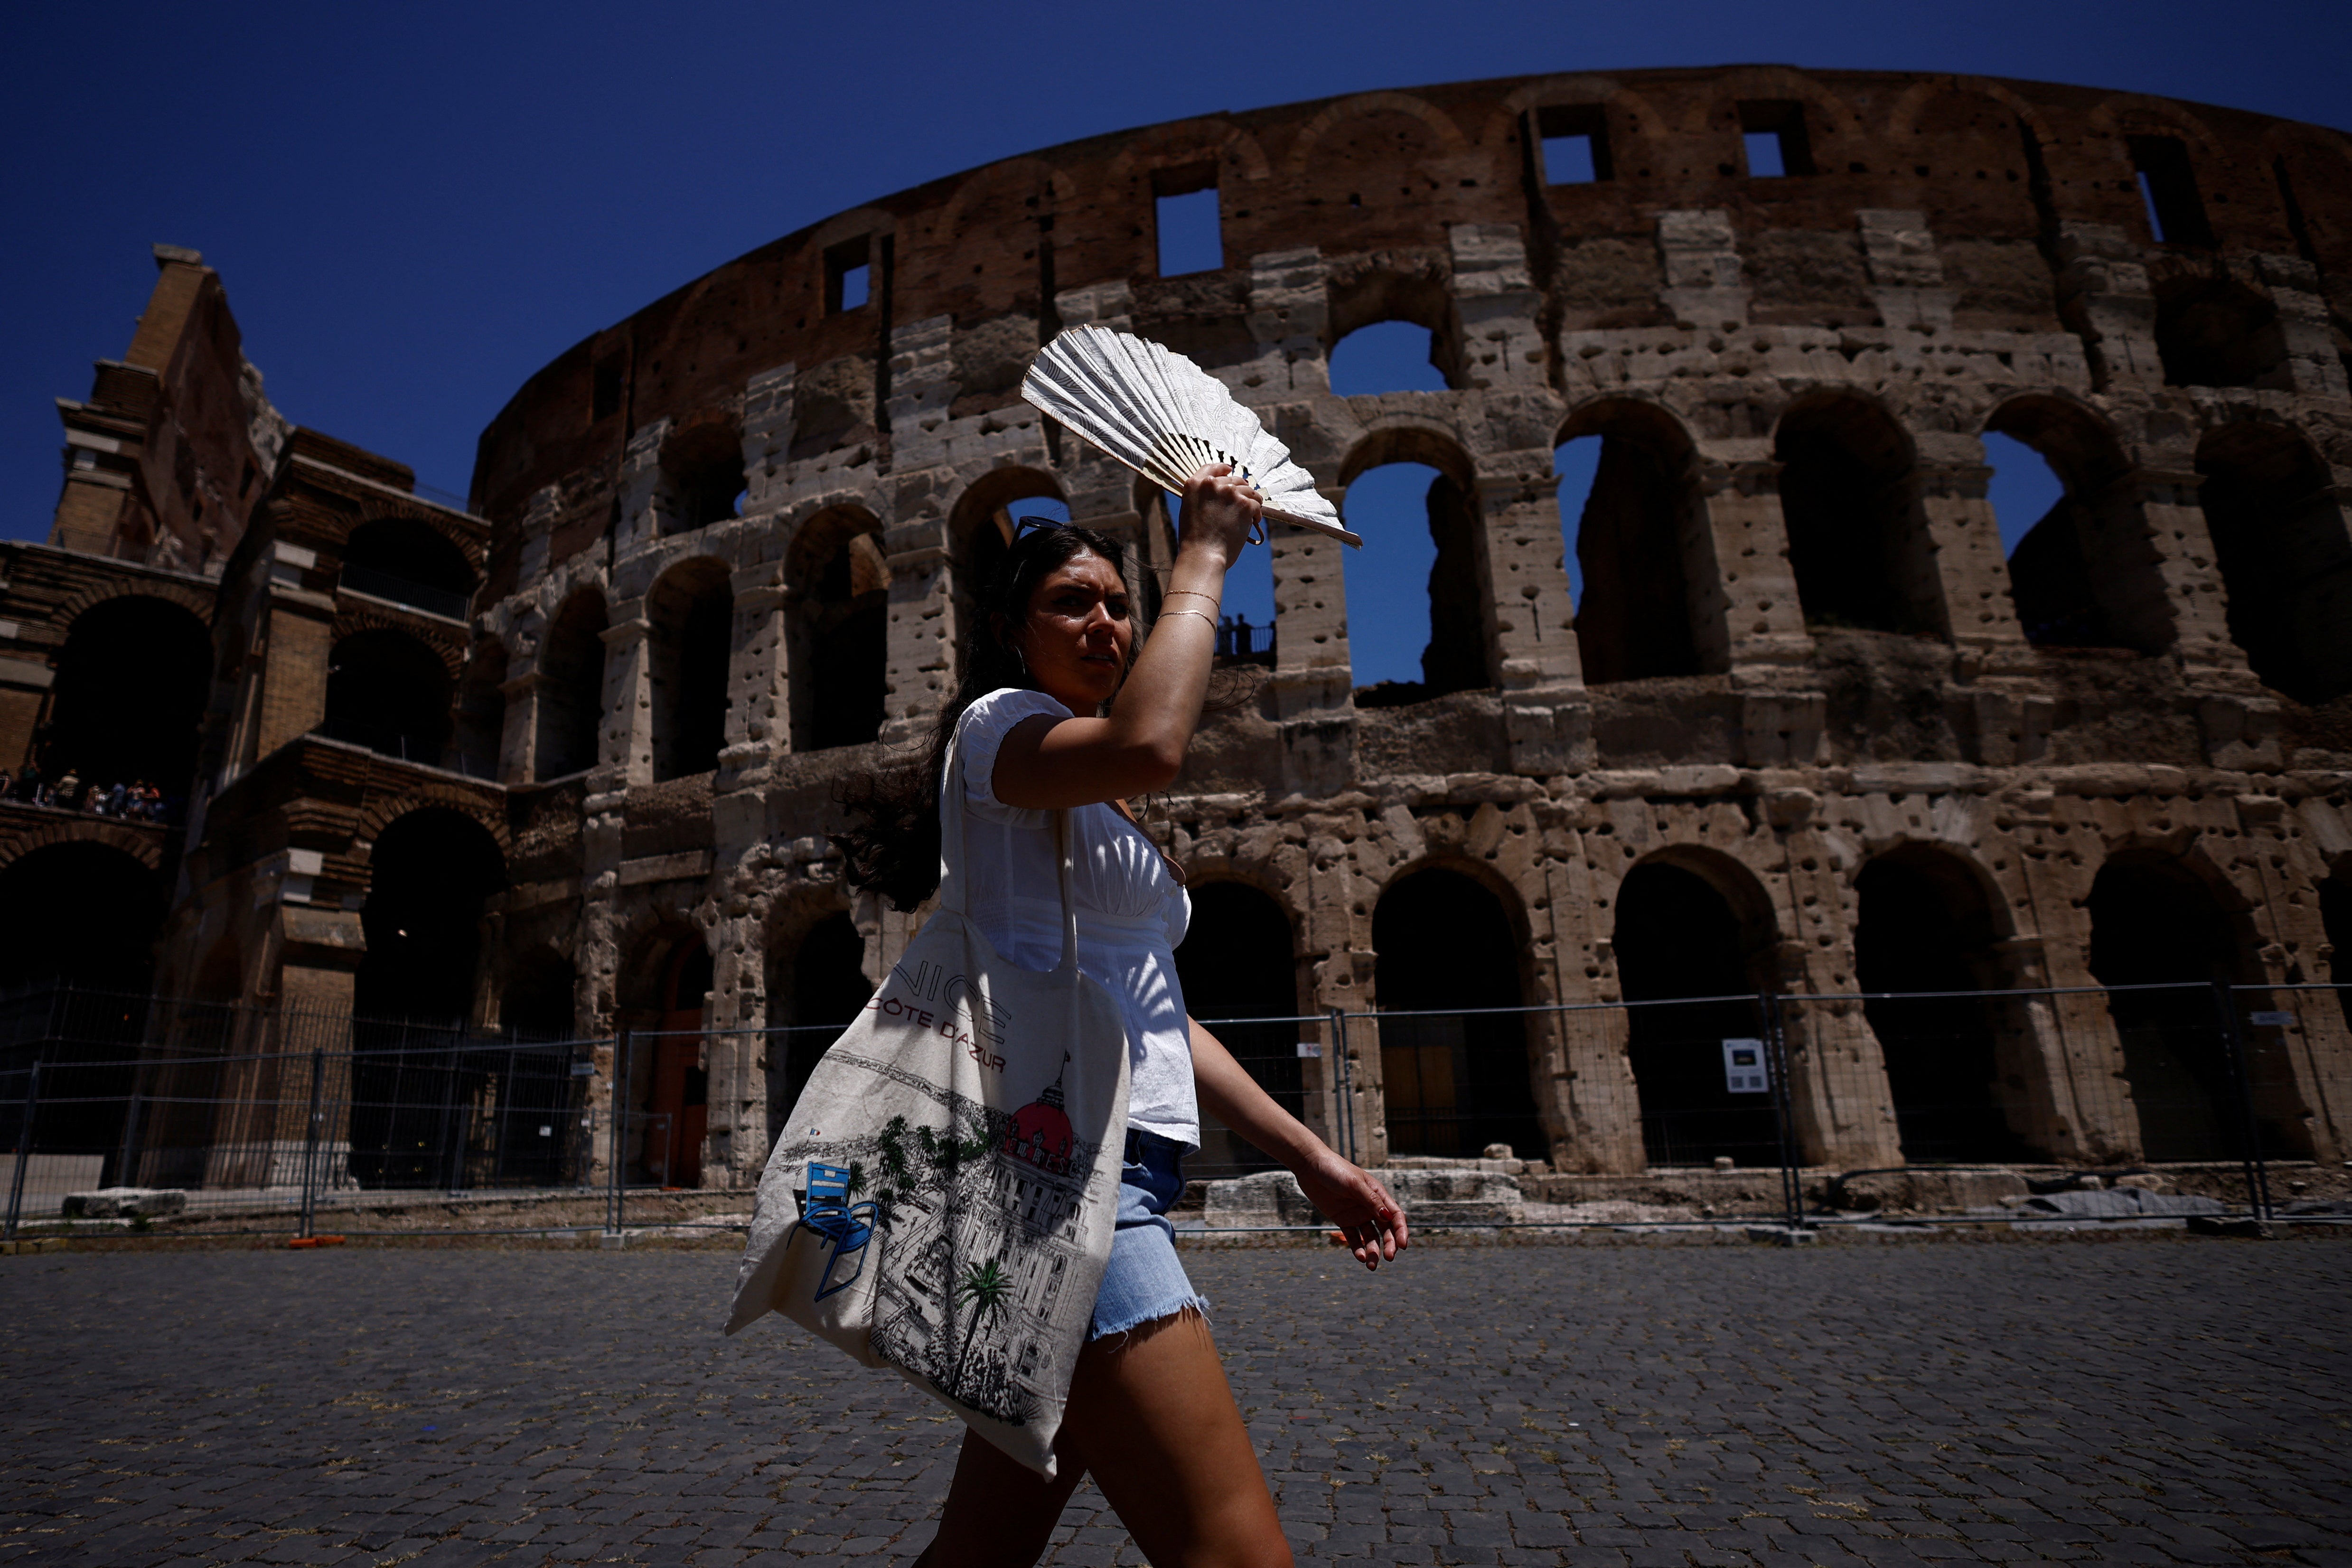 Visitors have been pictured using fans and clothing to shelter from the sun